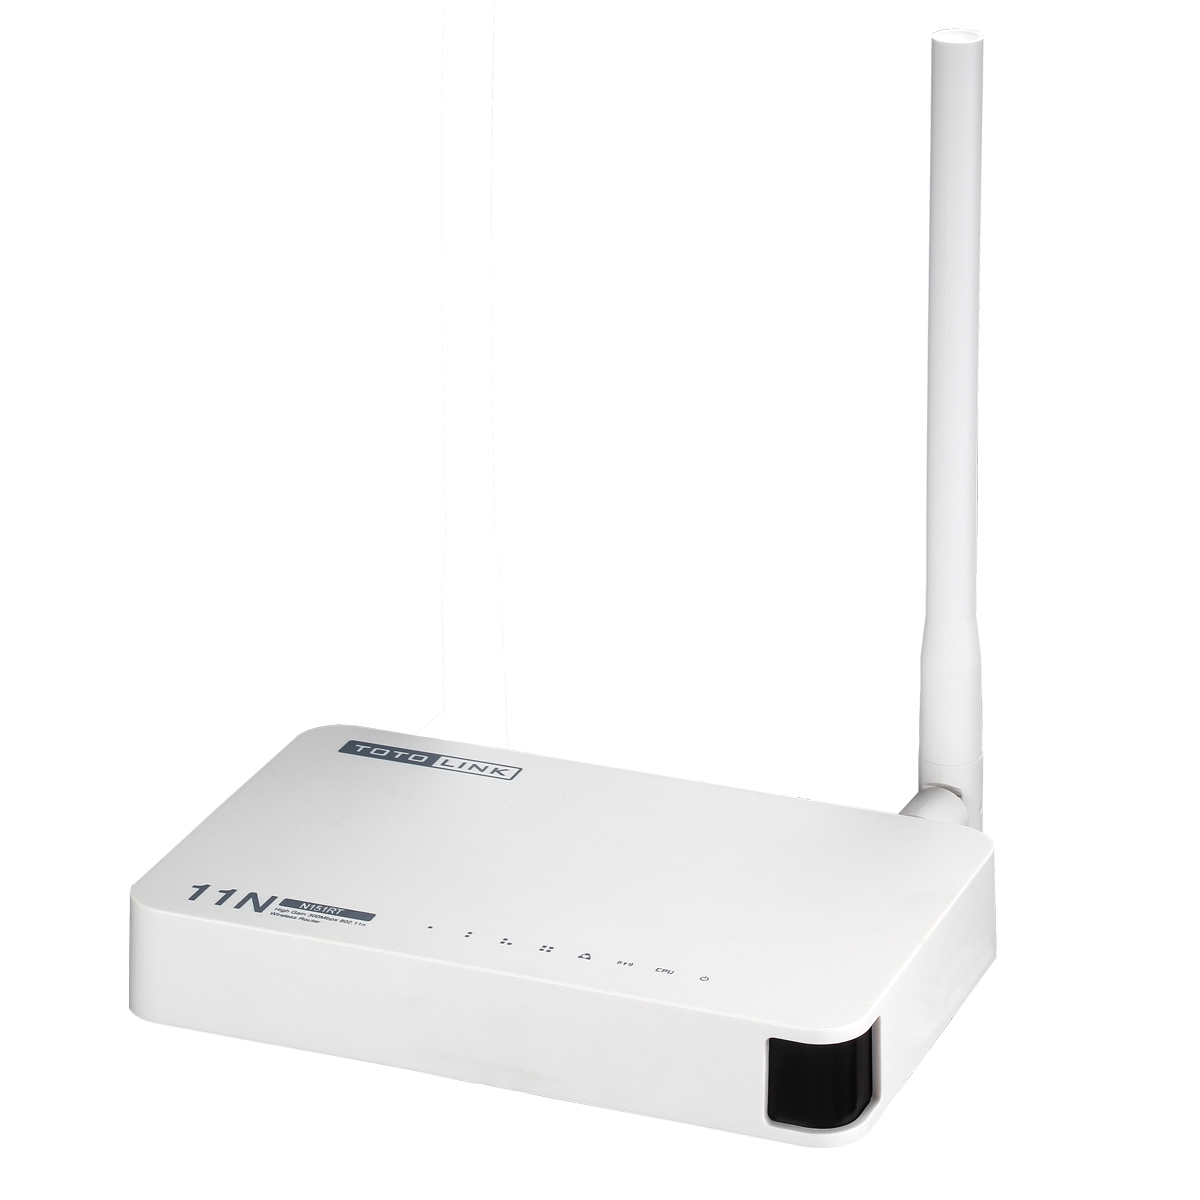 TotoLink N151RT wireless n router Lisconet